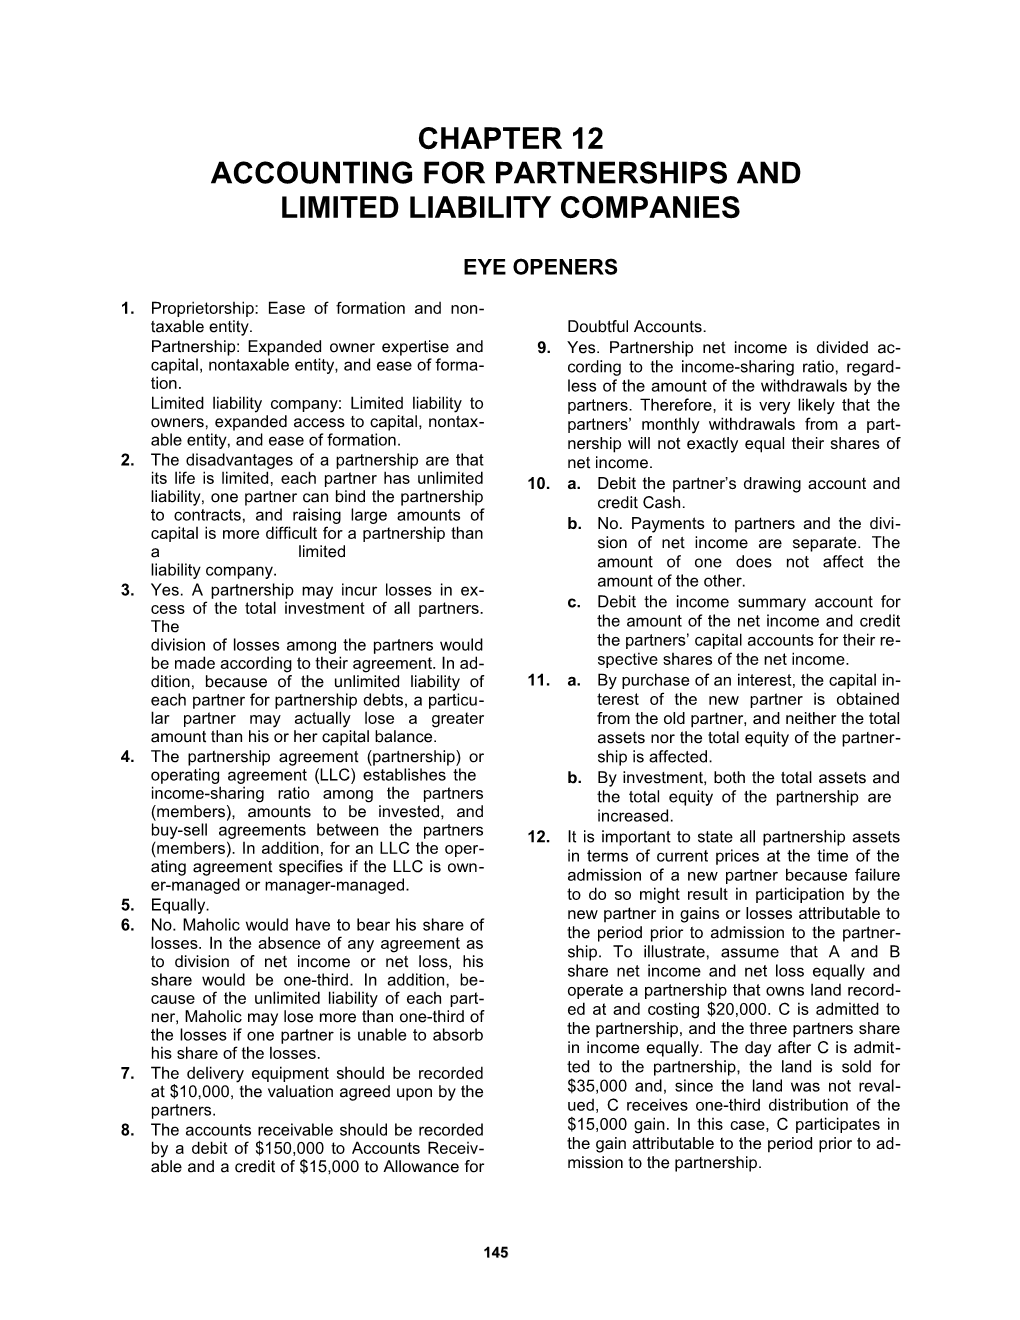 CHAPTER 12Accounting for Partnerships and Limited Liability COMPANIES